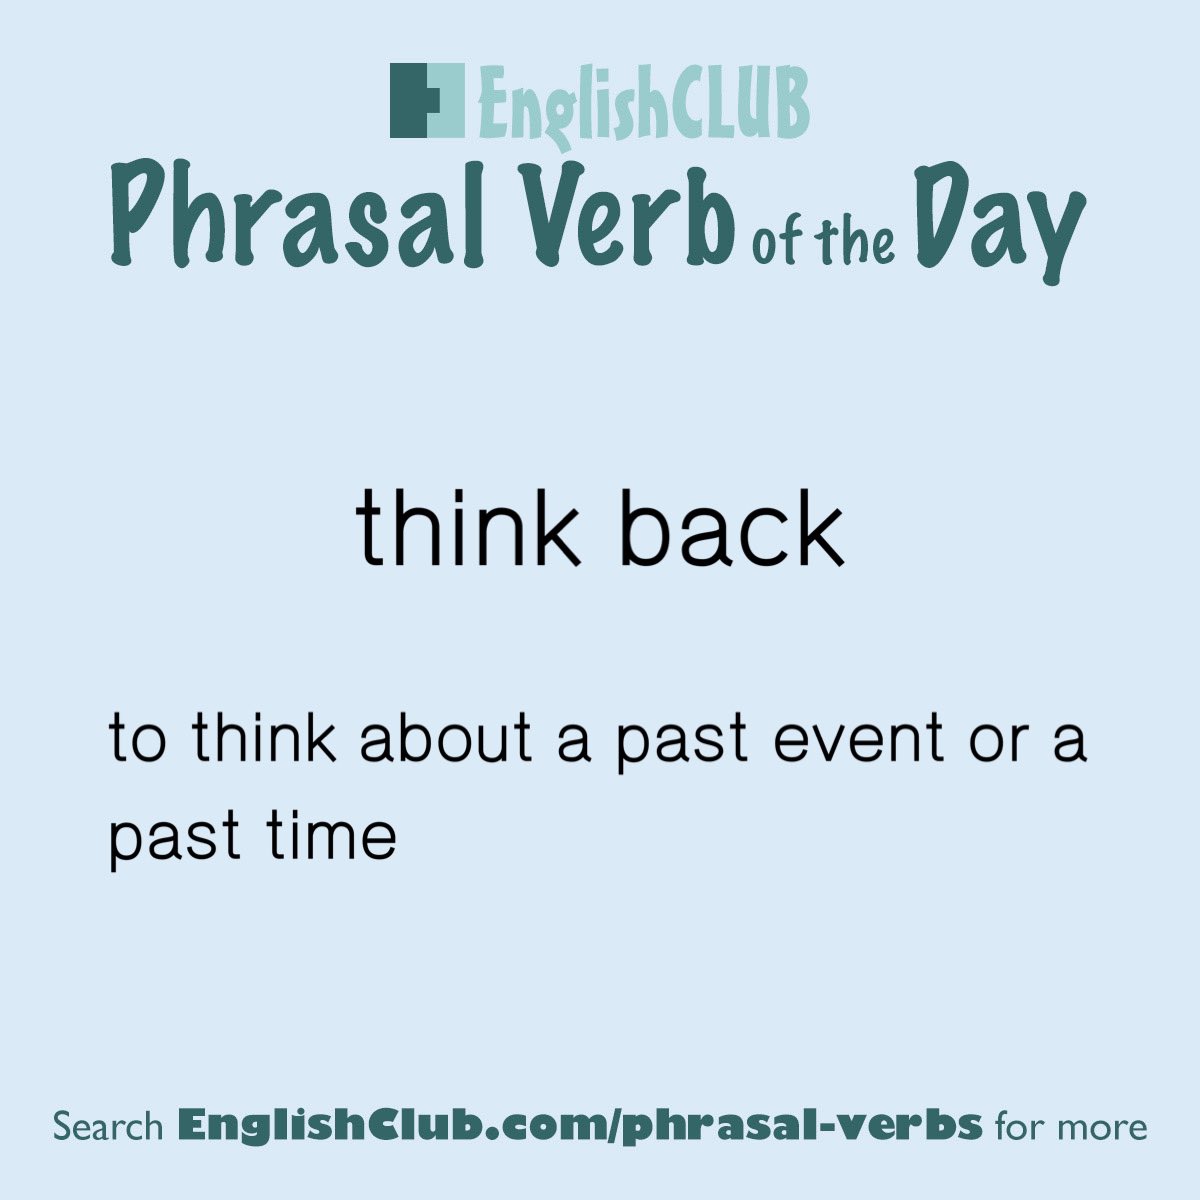 For example sentences and much more see EnglishClub.com/word-of-the-day